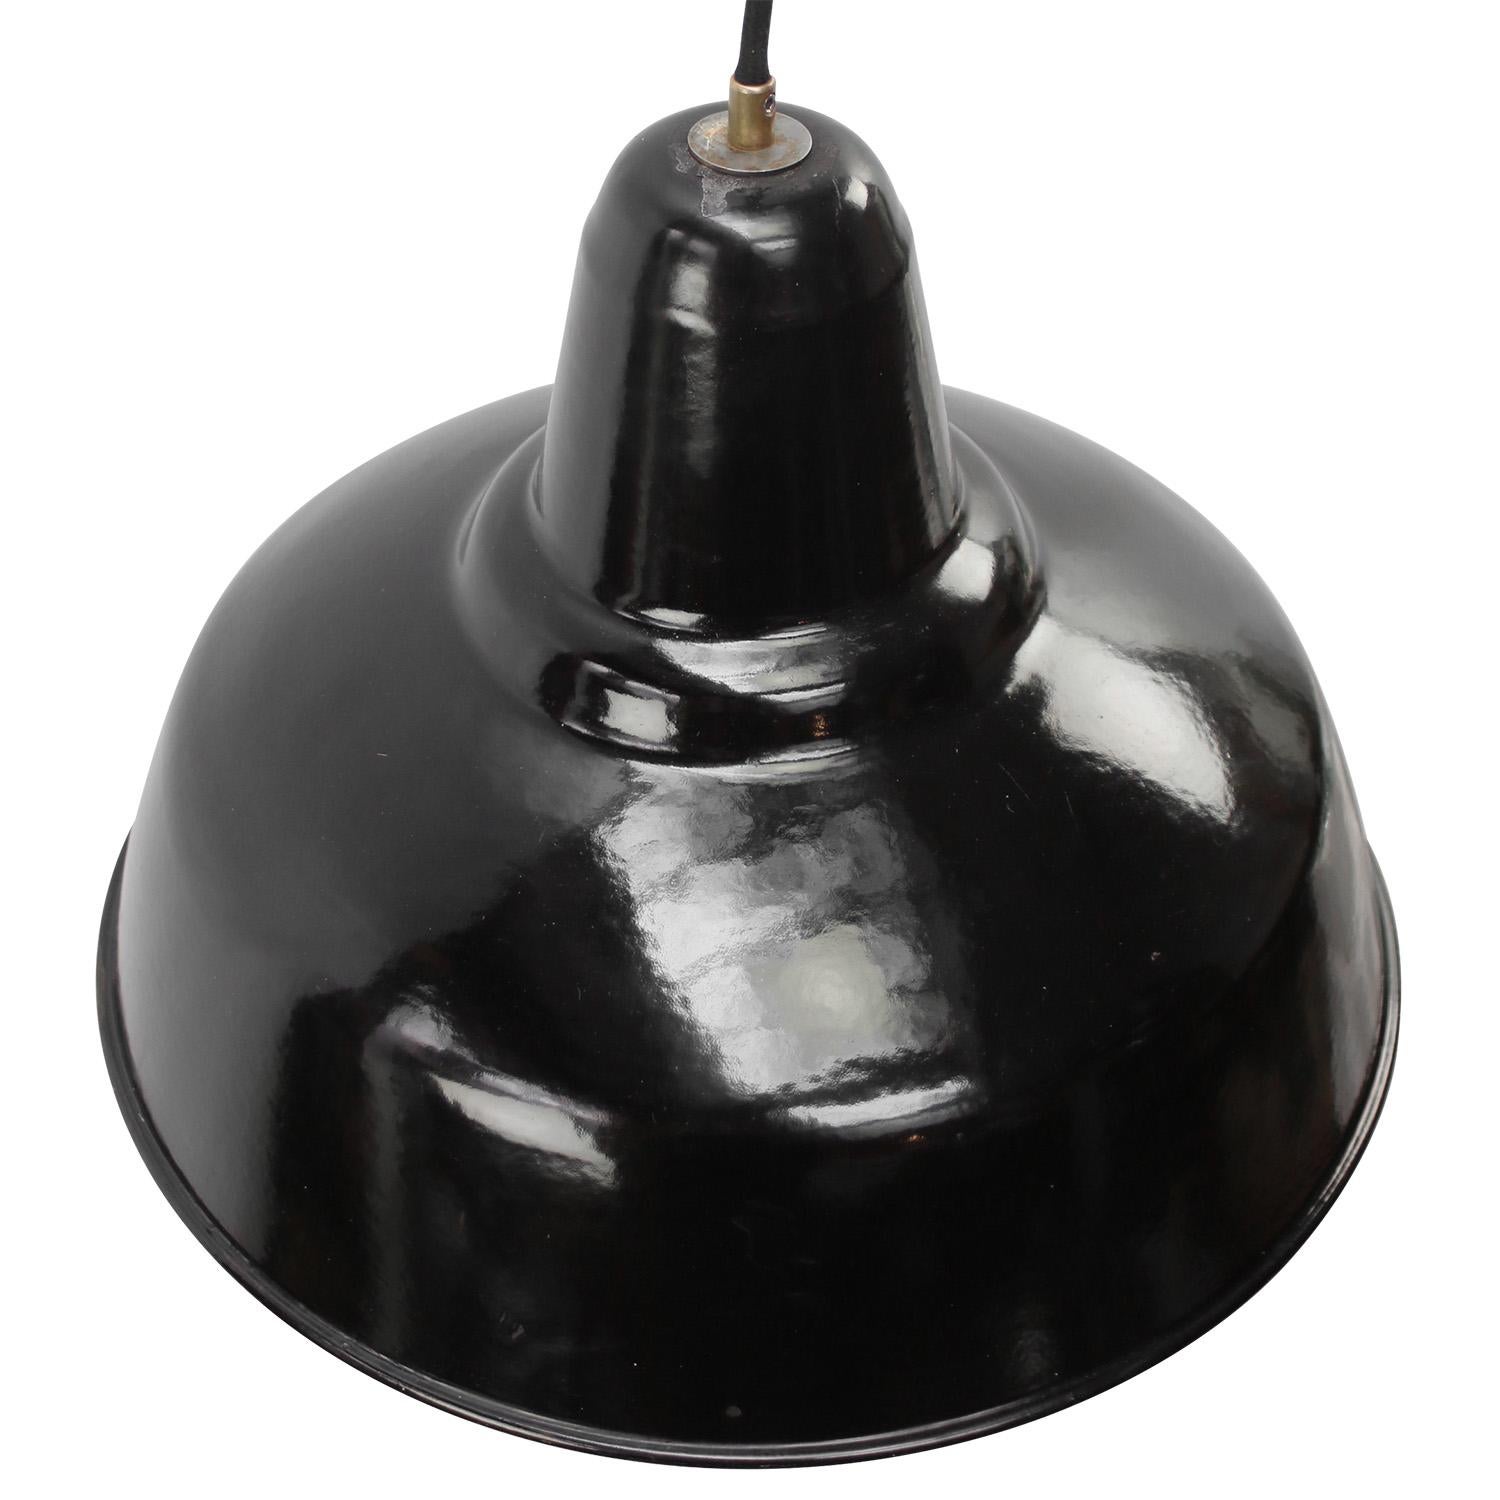 Dutch industrial hanging lamp by Philips
Black enamel white interior

Weight: 1.90 kg / 4.2 lb

Priced per individual item. All lamps have been made suitable by international standards for incandescent light bulbs, energy-efficient and LED bulbs.